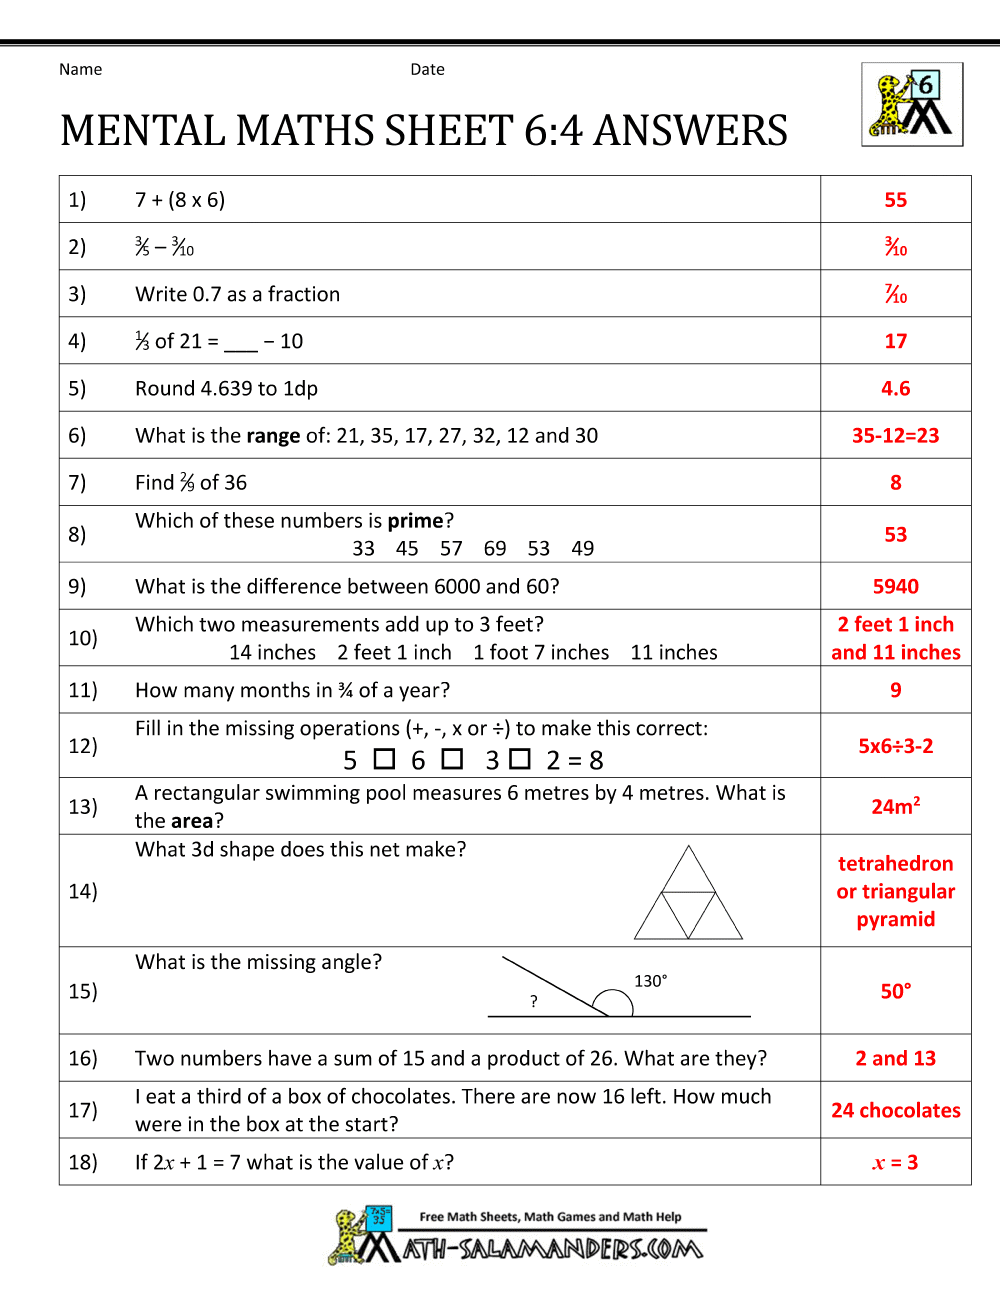 Maths Worksheets For Grade 6 With Answers 76861